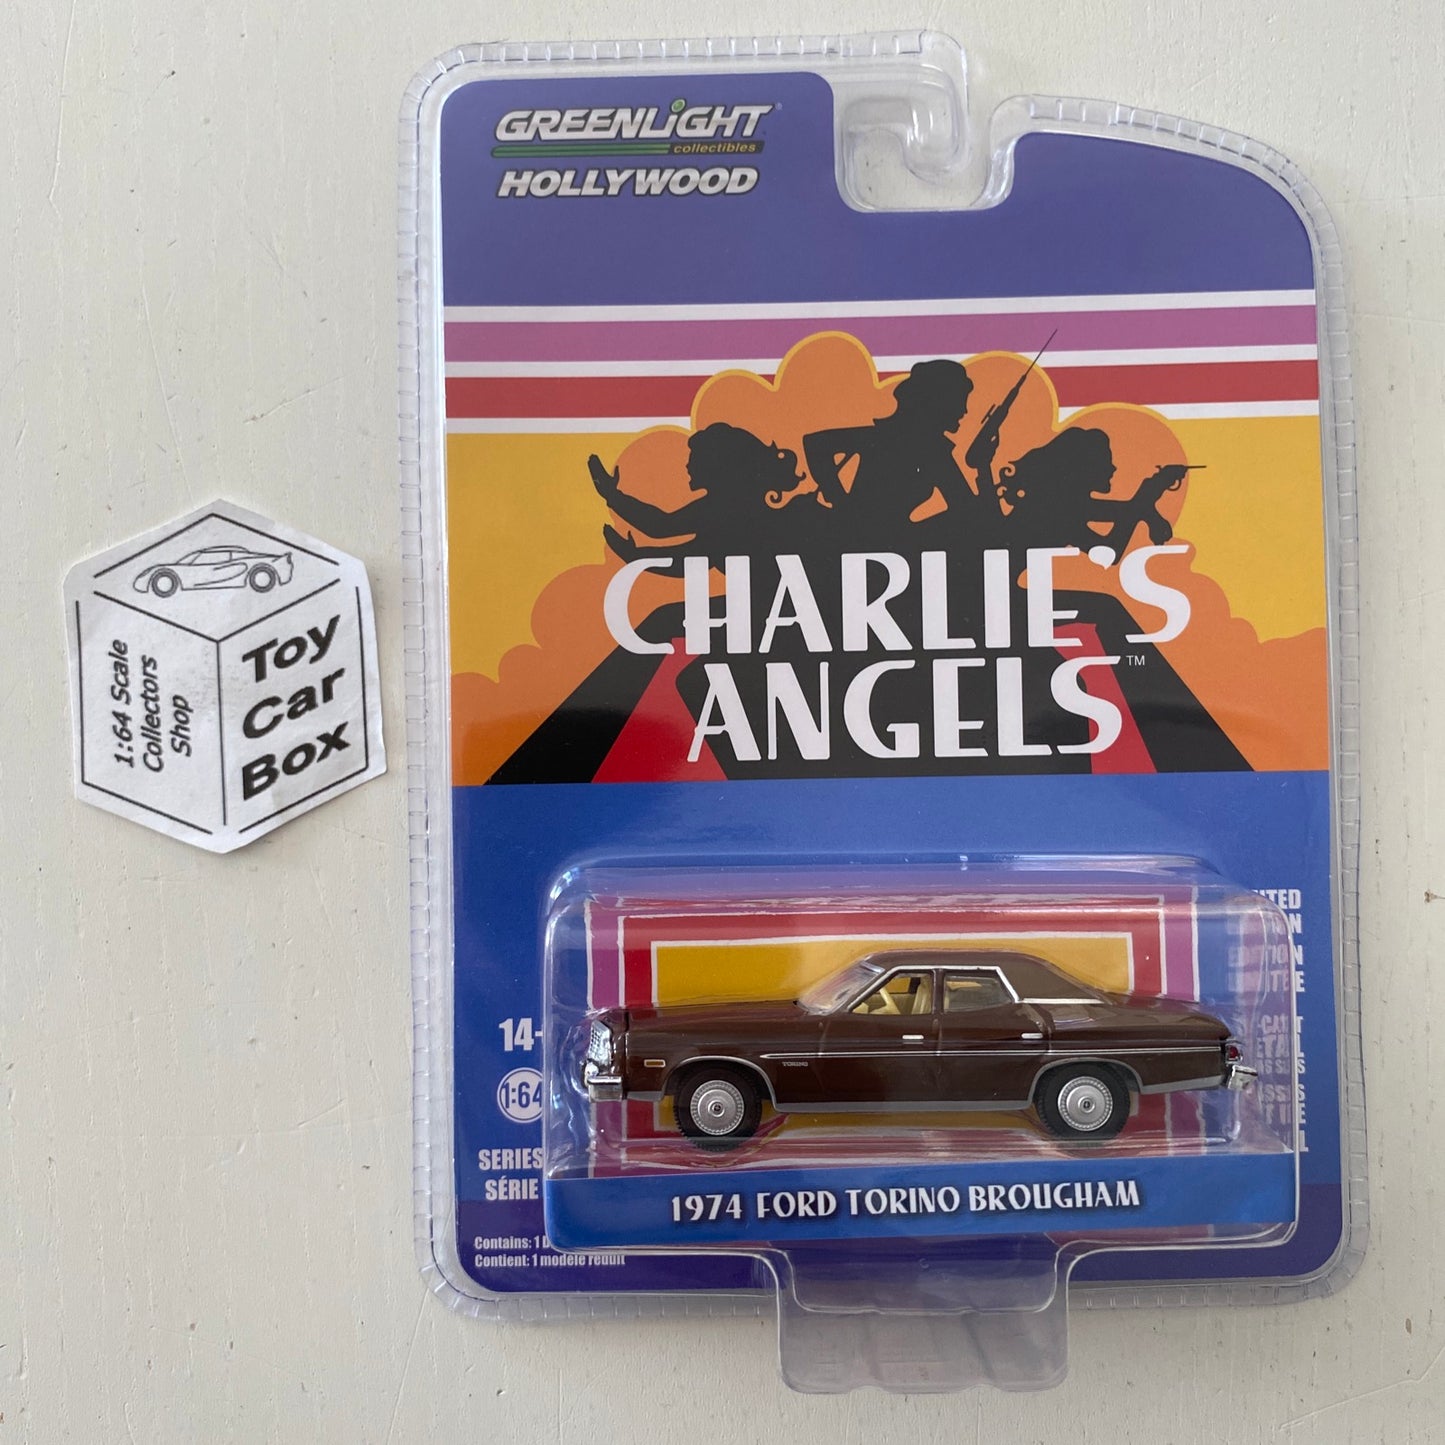 GREENLIGHT - 1974 Ford Torino Brougham (Charlie’s Angels - Hollywood S 37) J95